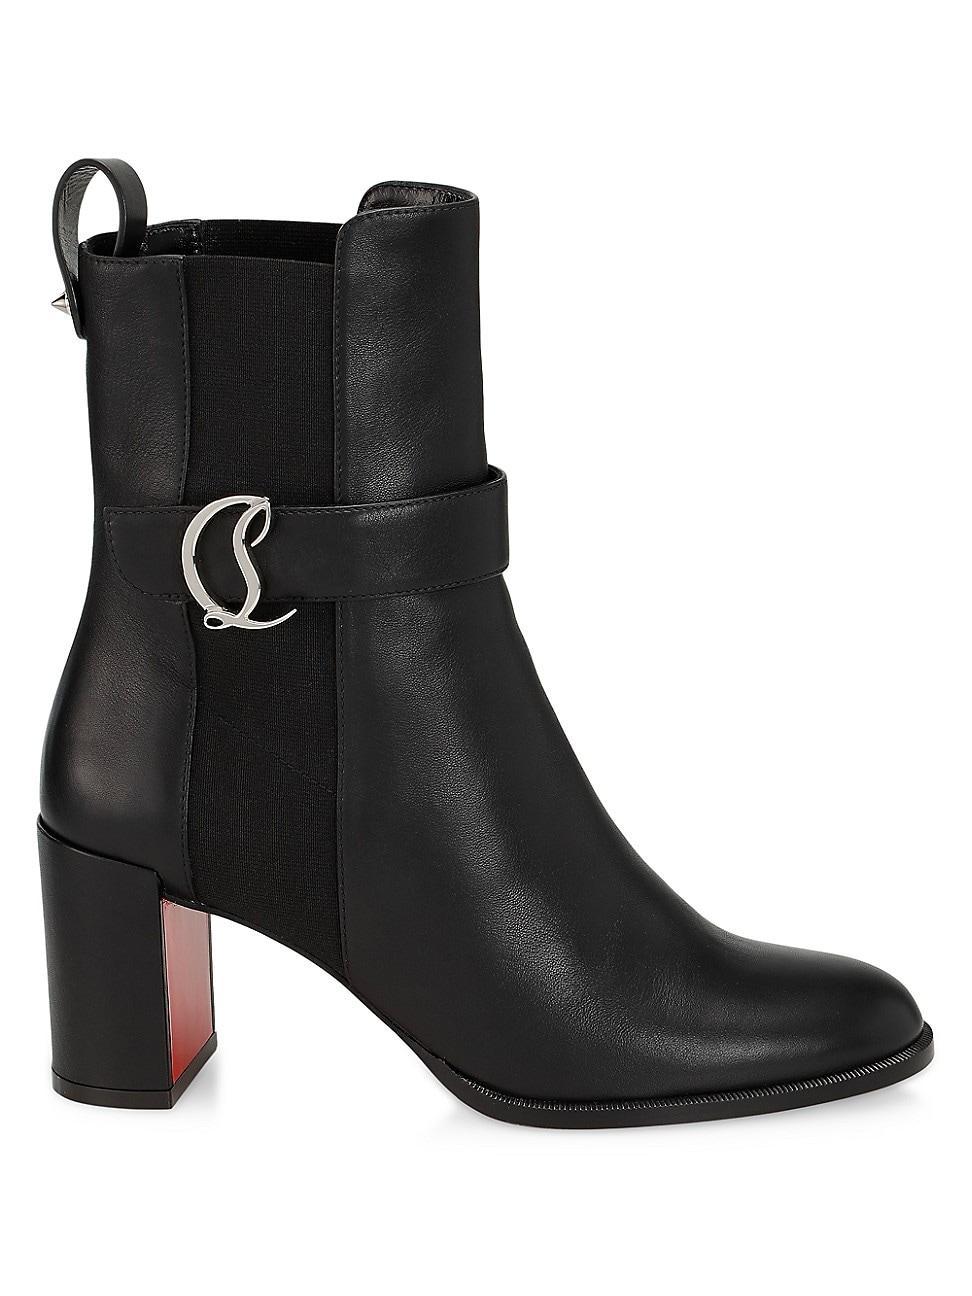 Christian Louboutin CL Monogram Chelsea Bootie Product Image